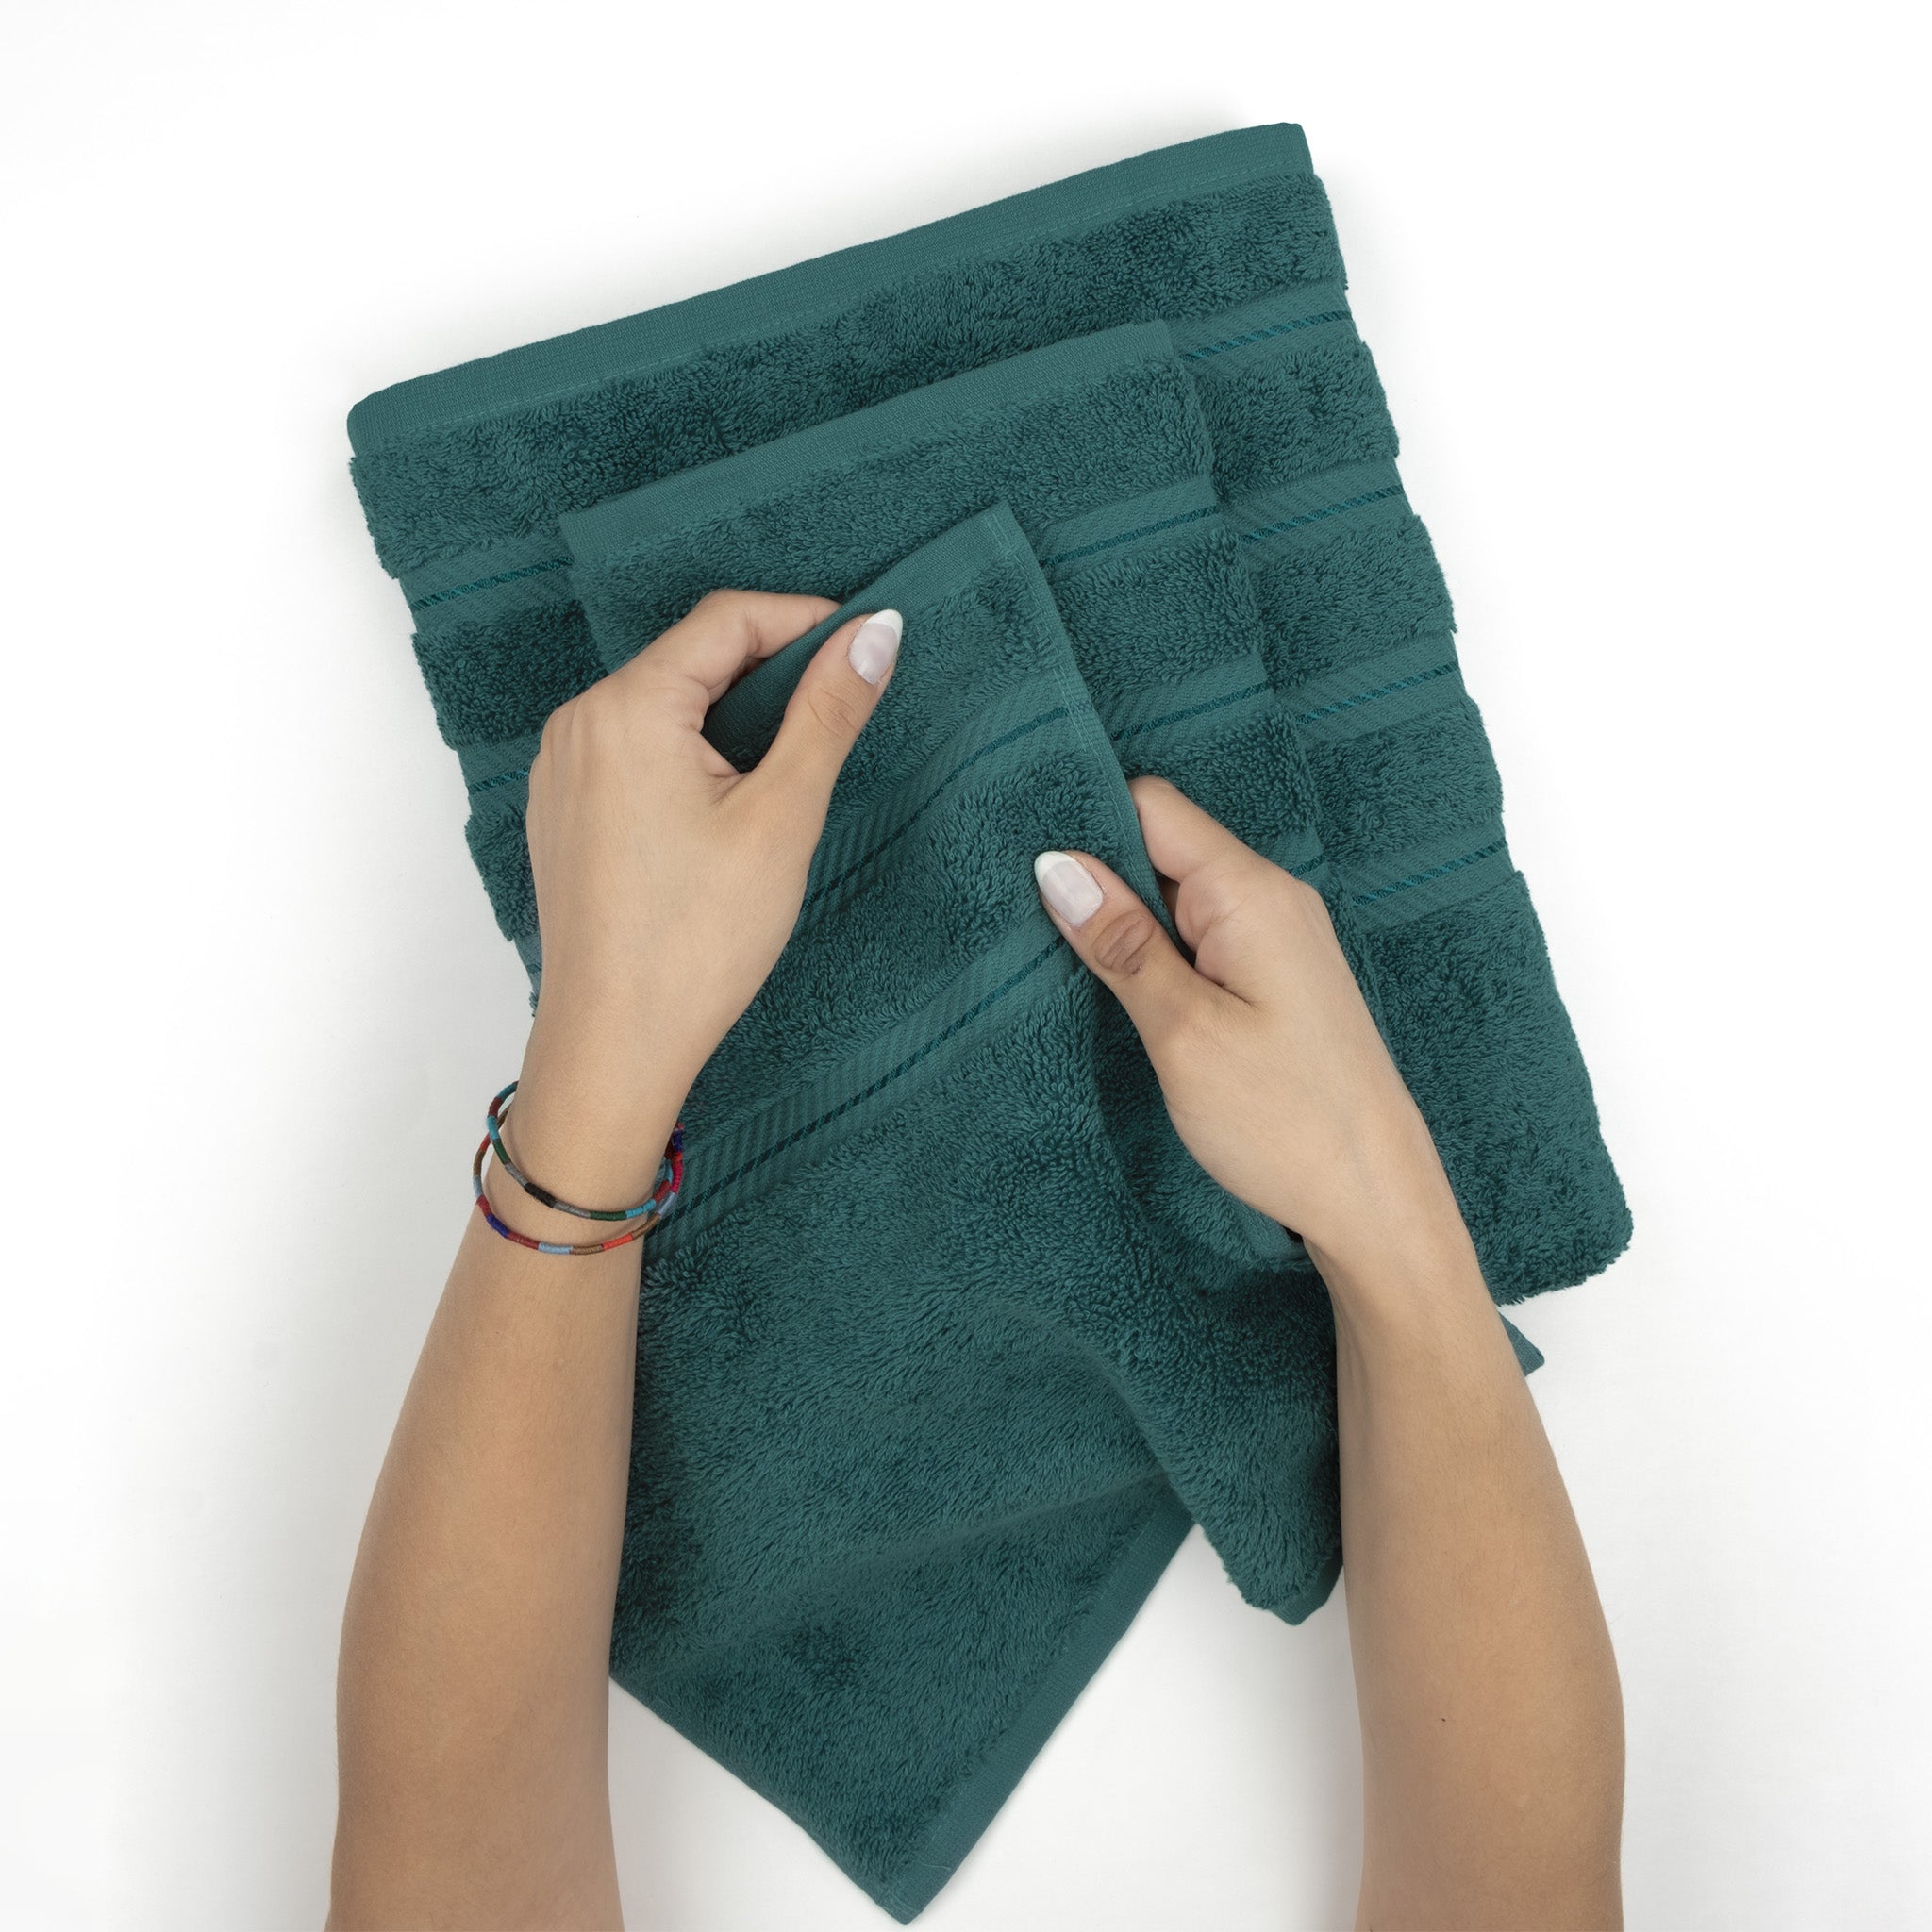  TEXTILOM 100% Turkish Cotton Oversized Luxury Bath Sheets,  Jumbo & Extra Large Bath Towels Sheet for Bathroom and Shower with Maximum  Softness & Absorbent (40 x 80 inches)- Green : Home & Kitchen